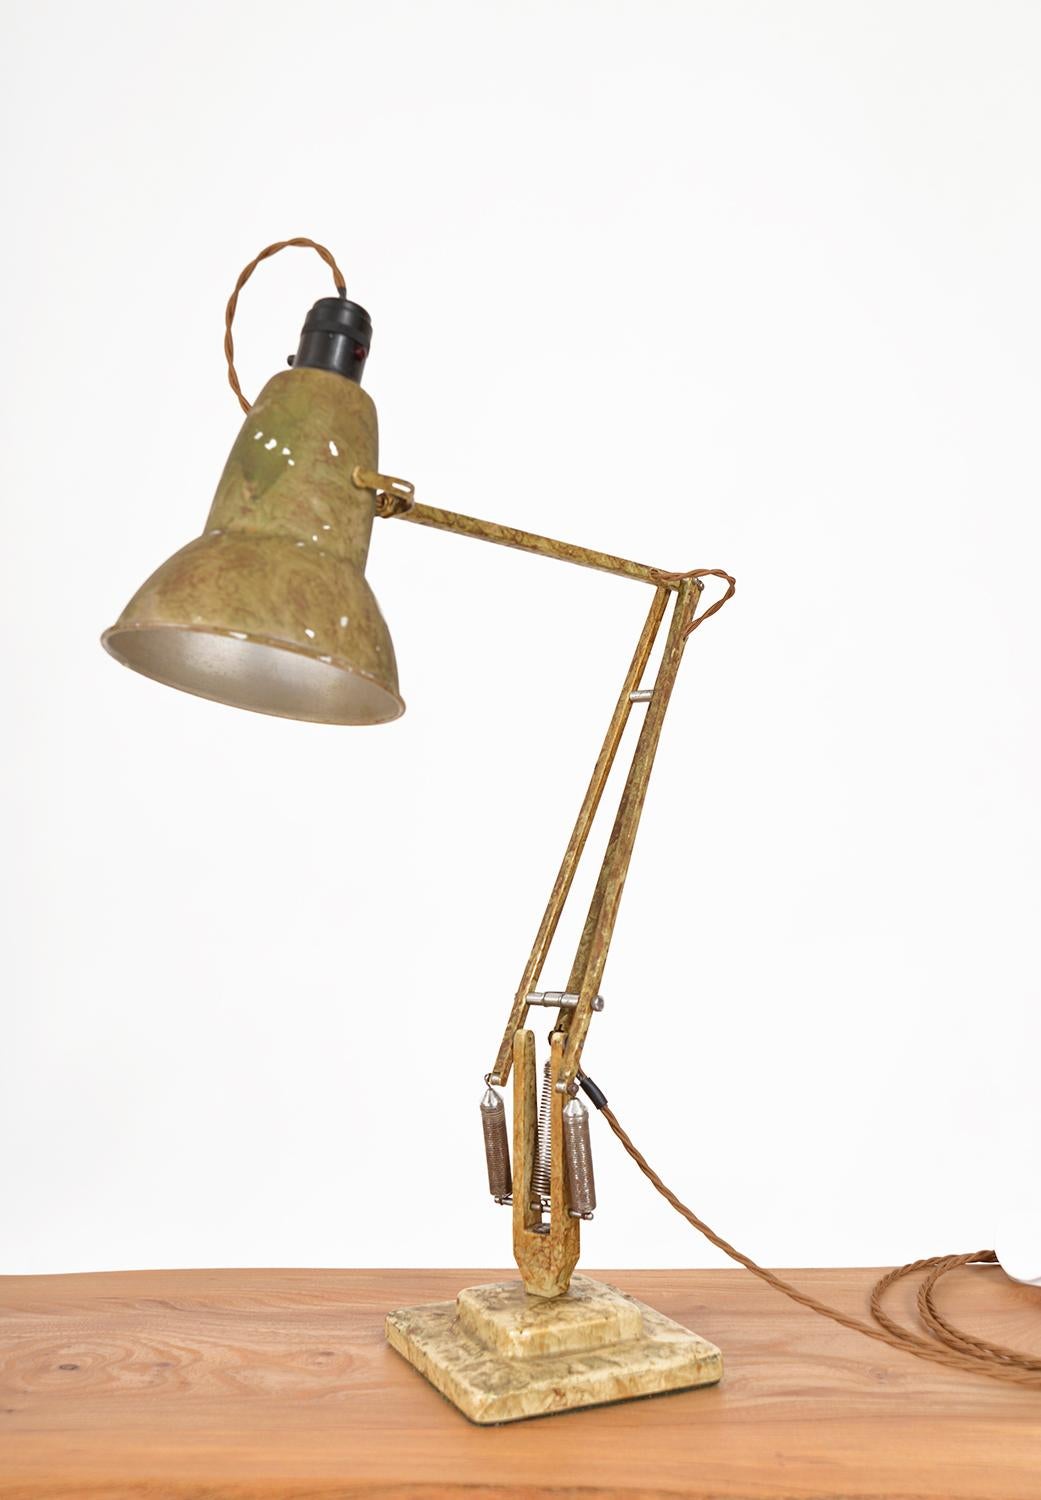 British 1950s Gold Scumble 2-step Anglepoise Desk Task Lamp 1227 By Herbert Terry & Sons